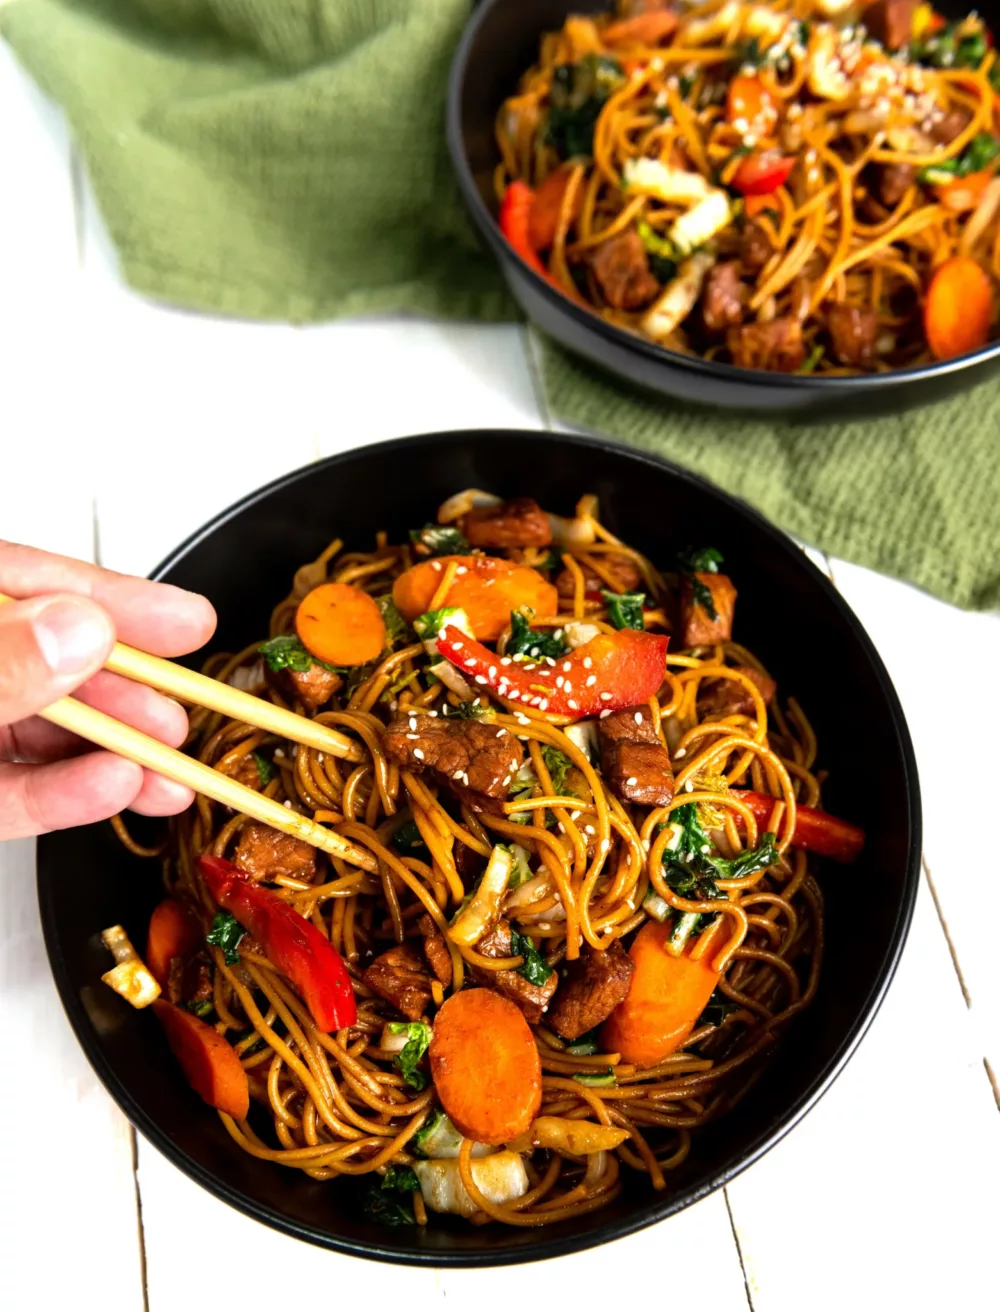 veggies and noodles in a black bowl with chopsticks